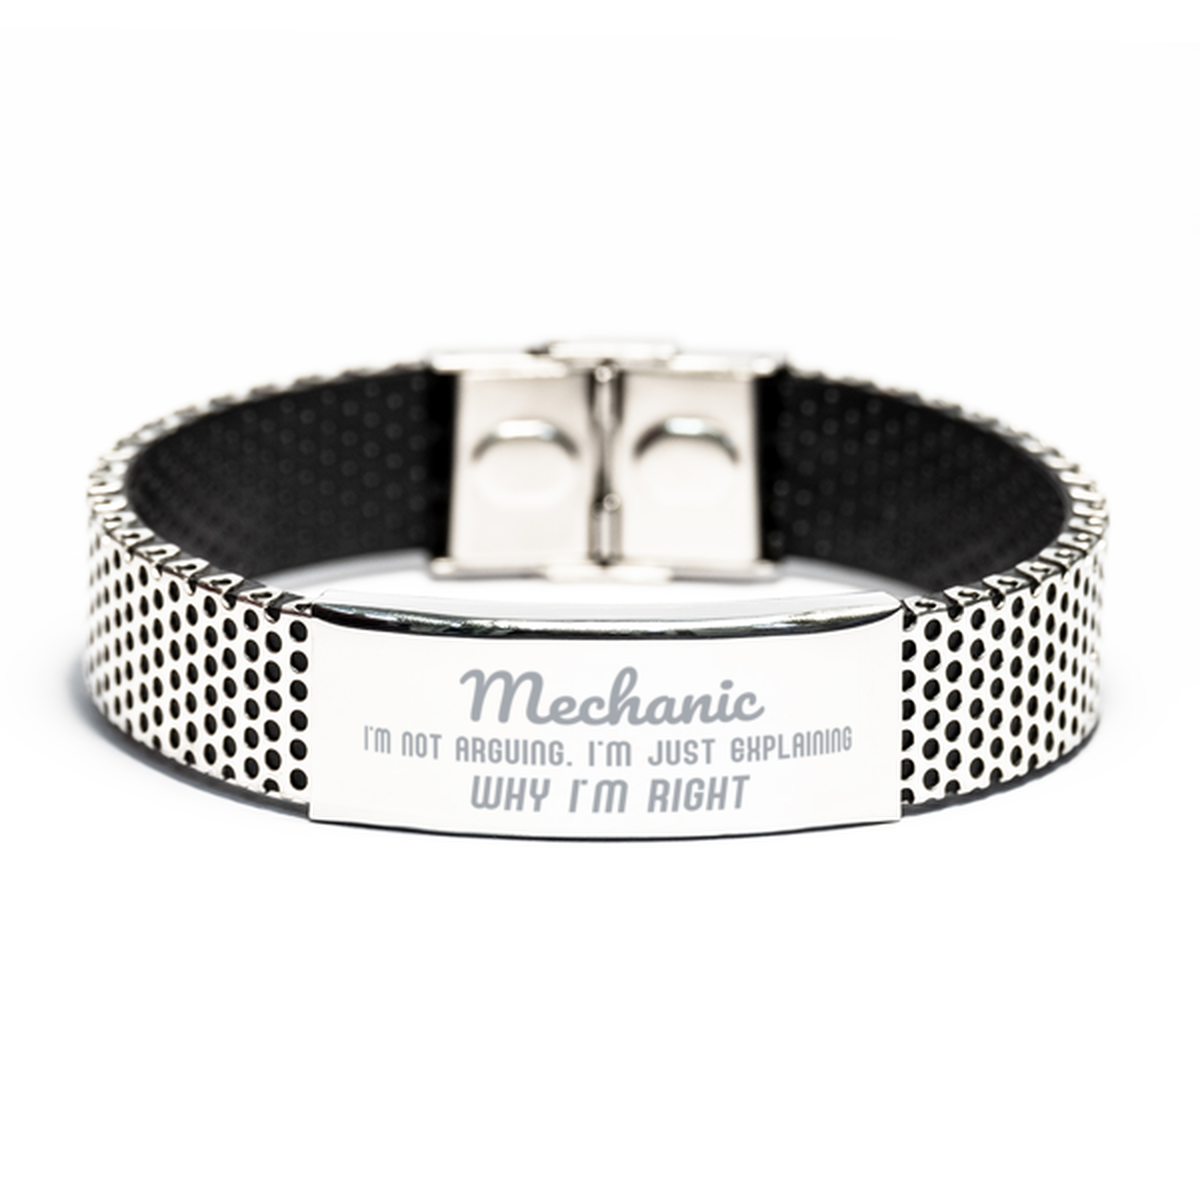 Mechanic I'm not Arguing. I'm Just Explaining Why I'm RIGHT Stainless Steel Bracelet, Funny Saying Quote Mechanic Gifts For Mechanic Graduation Birthday Christmas Gifts for Men Women Coworker